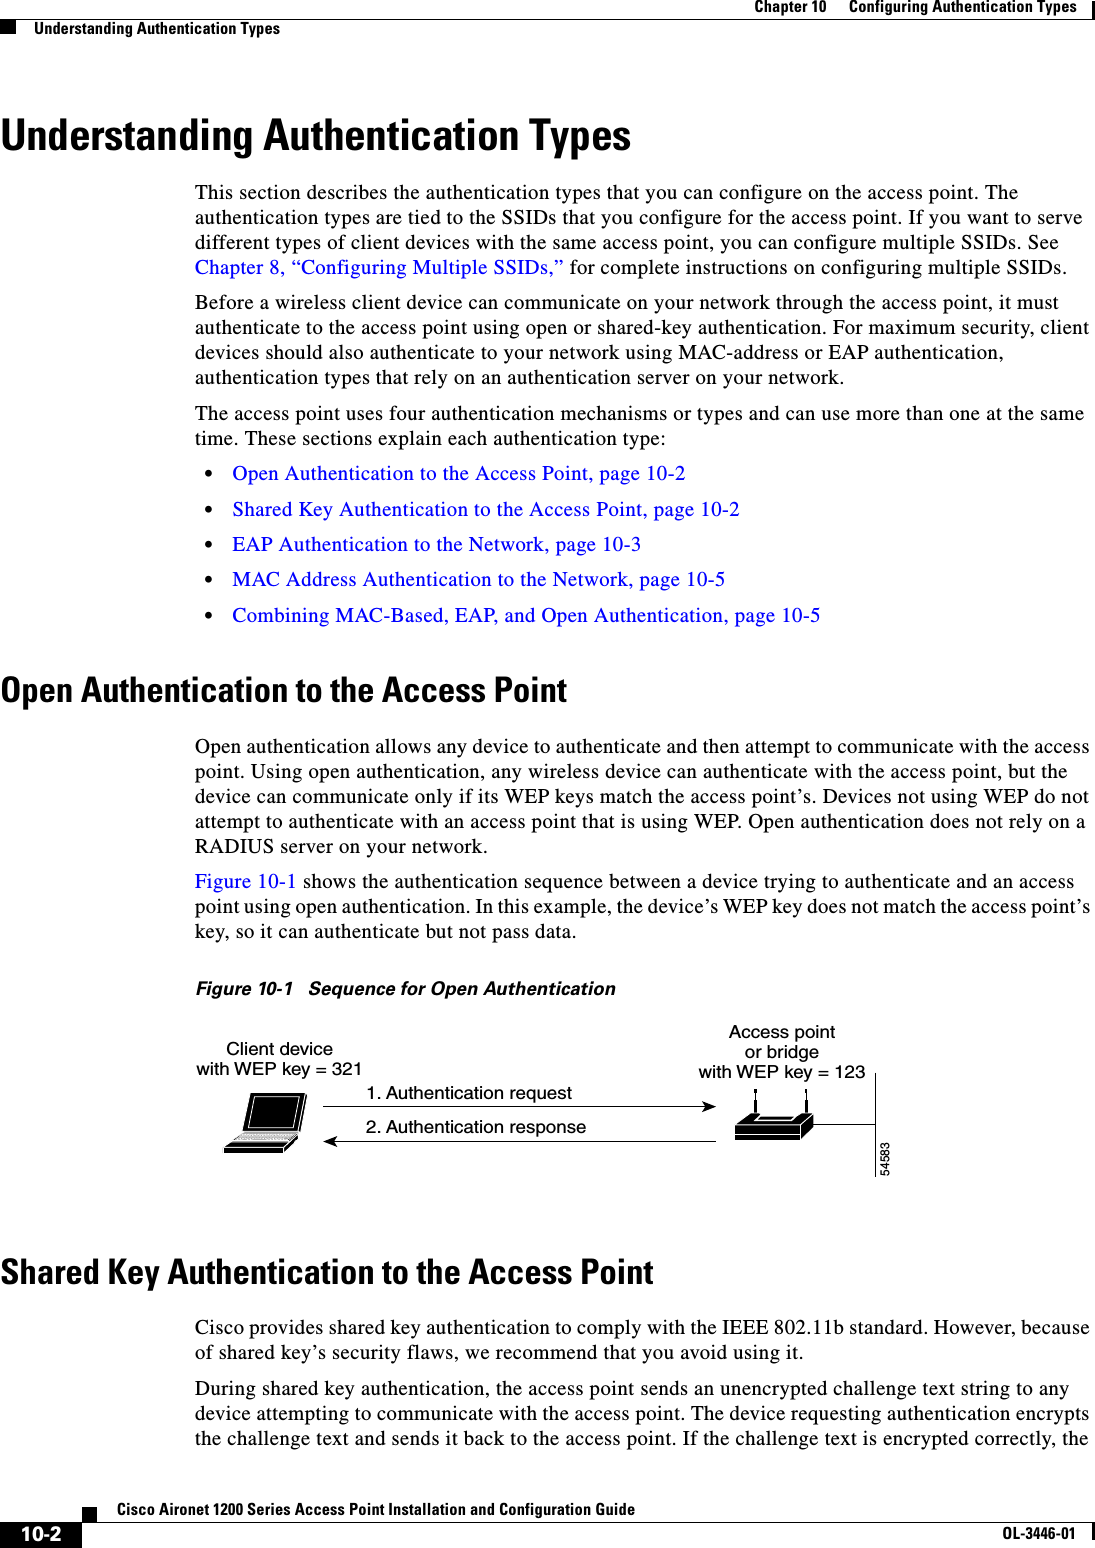 10-2Cisco Aironet 1200 Series Access Point Installation and Configuration GuideOL-3446-01Chapter 10      Configuring Authentication TypesUnderstanding Authentication TypesUnderstanding Authentication TypesThis section describes the authentication types that you can configure on the access point. The authentication types are tied to the SSIDs that you configure for the access point. If you want to serve different types of client devices with the same access point, you can configure multiple SSIDs. See Chapter 8, “Configuring Multiple SSIDs,” for complete instructions on configuring multiple SSIDs.Before a wireless client device can communicate on your network through the access point, it must authenticate to the access point using open or shared-key authentication. For maximum security, client devices should also authenticate to your network using MAC-address or EAP authentication, authentication types that rely on an authentication server on your network.The access point uses four authentication mechanisms or types and can use more than one at the same time. These sections explain each authentication type:•Open Authentication to the Access Point, page 10-2•Shared Key Authentication to the Access Point, page 10-2•EAP Authentication to the Network, page 10-3•MAC Address Authentication to the Network, page 10-5•Combining MAC-Based, EAP, and Open Authentication, page 10-5Open Authentication to the Access PointOpen authentication allows any device to authenticate and then attempt to communicate with the access point. Using open authentication, any wireless device can authenticate with the access point, but the device can communicate only if its WEP keys match the access point’s. Devices not using WEP do not attempt to authenticate with an access point that is using WEP. Open authentication does not rely on a RADIUS server on your network. Figure 10-1 shows the authentication sequence between a device trying to authenticate and an access point using open authentication. In this example, the device’s WEP key does not match the access point’skey, so it can authenticate but not pass data.Figure 10-1 Sequence for Open AuthenticationShared Key Authentication to the Access PointCisco provides shared key authentication to comply with the IEEE 802.11b standard. However, because of shared key’s security flaws, we recommend that you avoid using it.During shared key authentication, the access point sends an unencrypted challenge text string to any device attempting to communicate with the access point. The device requesting authentication encrypts the challenge text and sends it back to the access point. If the challenge text is encrypted correctly, the Access pointor bridgewith WEP key = 123Client devicewith WEP key = 3211. Authentication request2. Authentication response54583